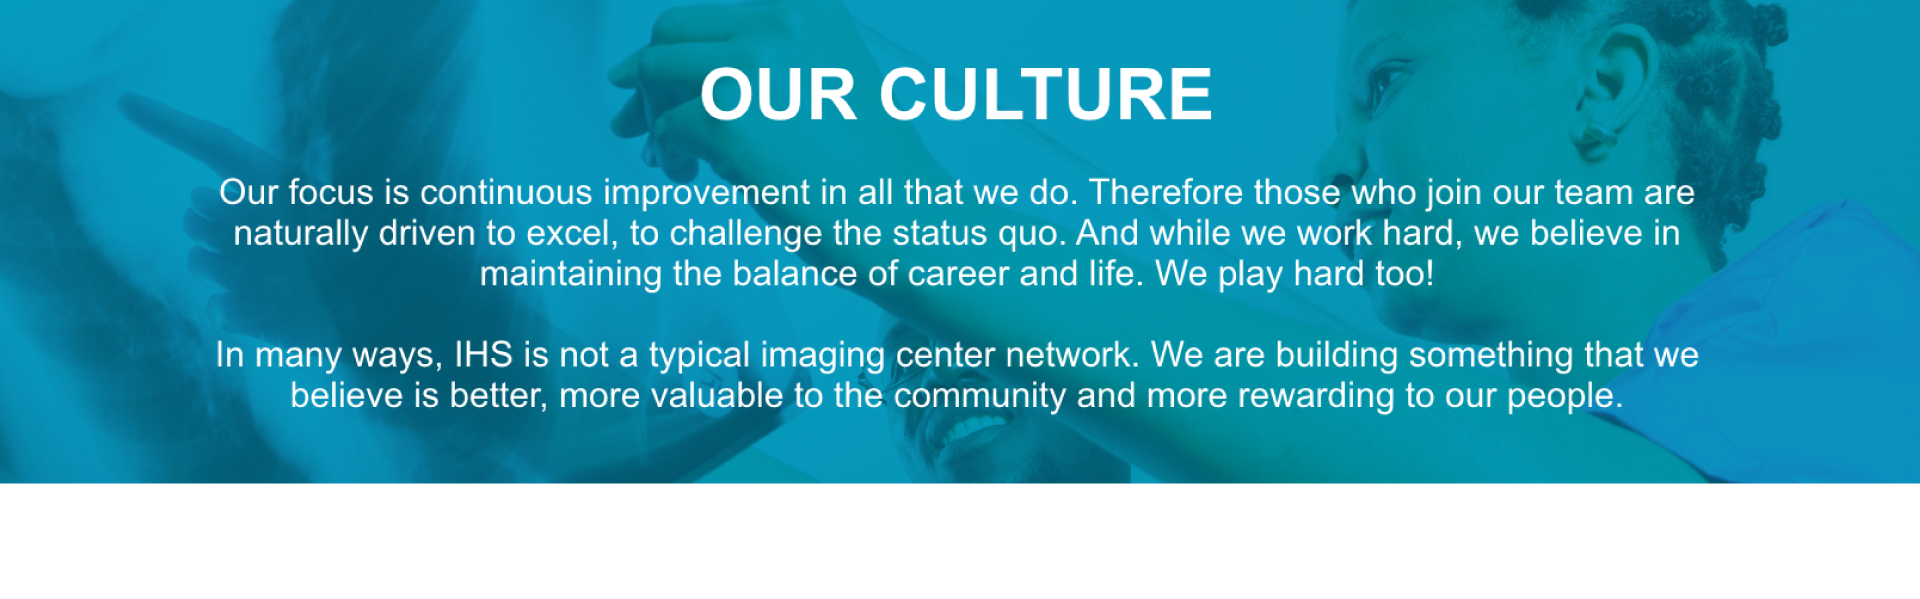 Our Culture at Imaging Healthcare Specialists